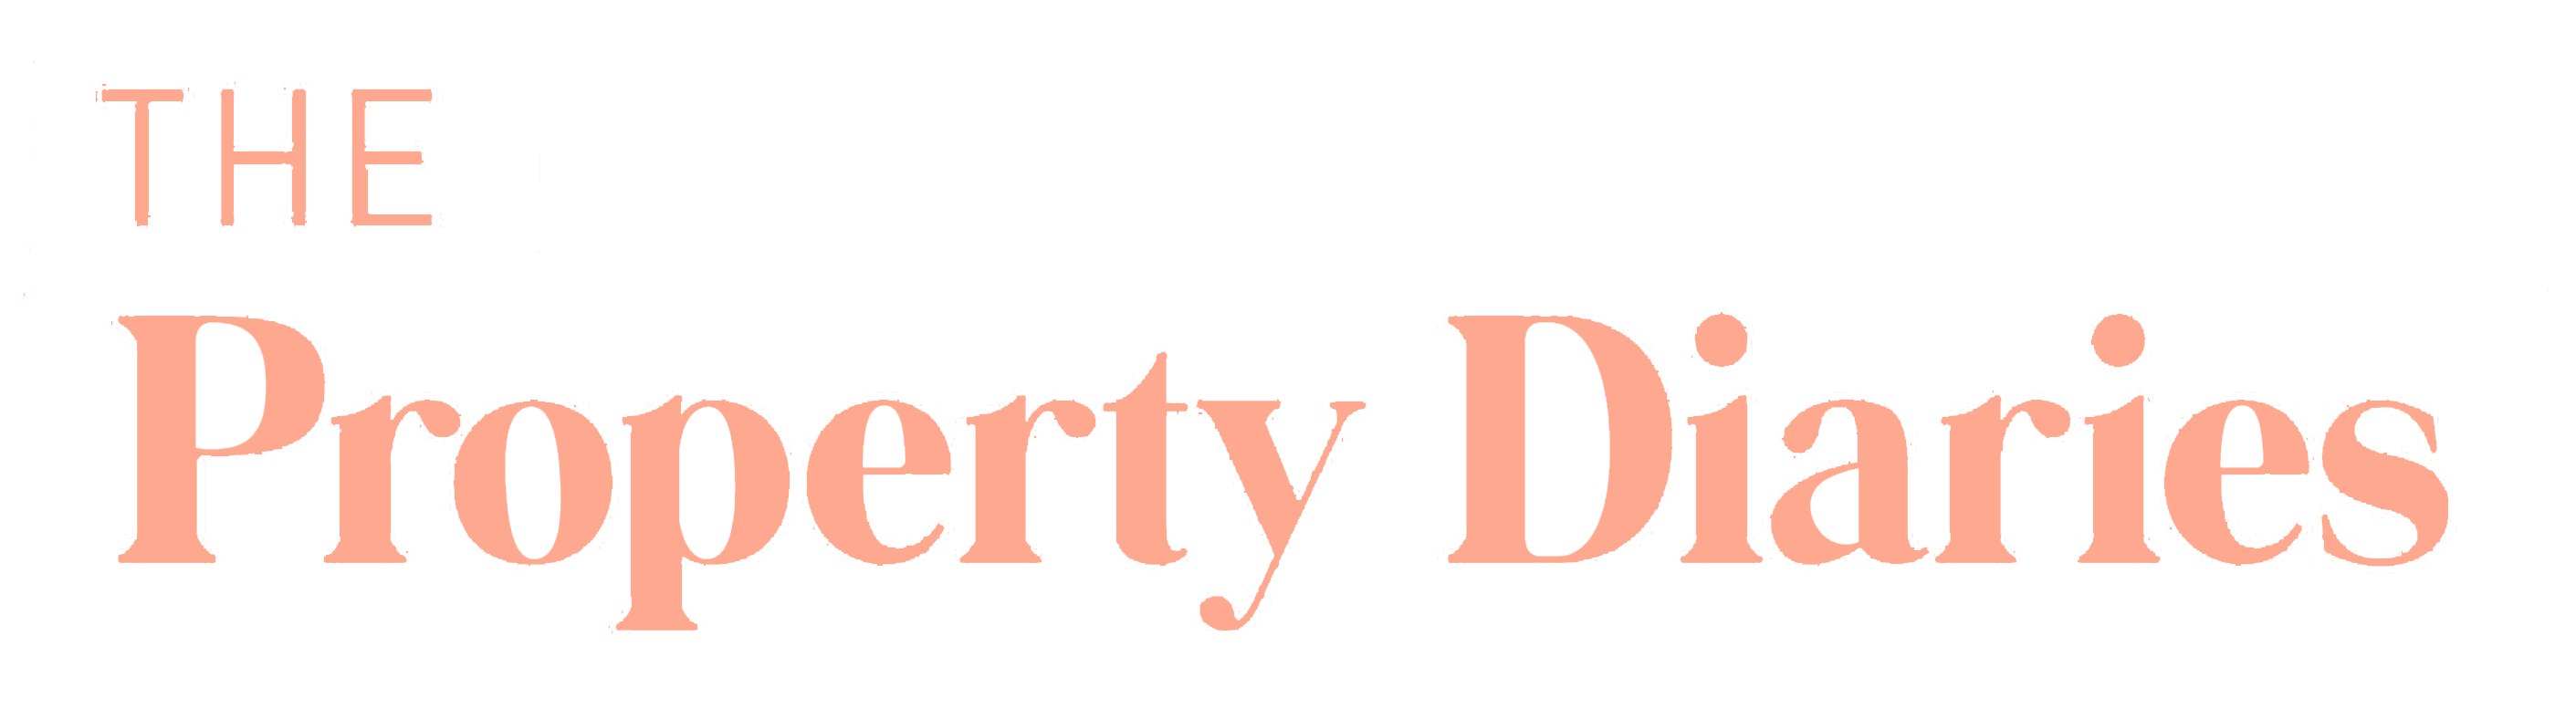 The Property Diaries